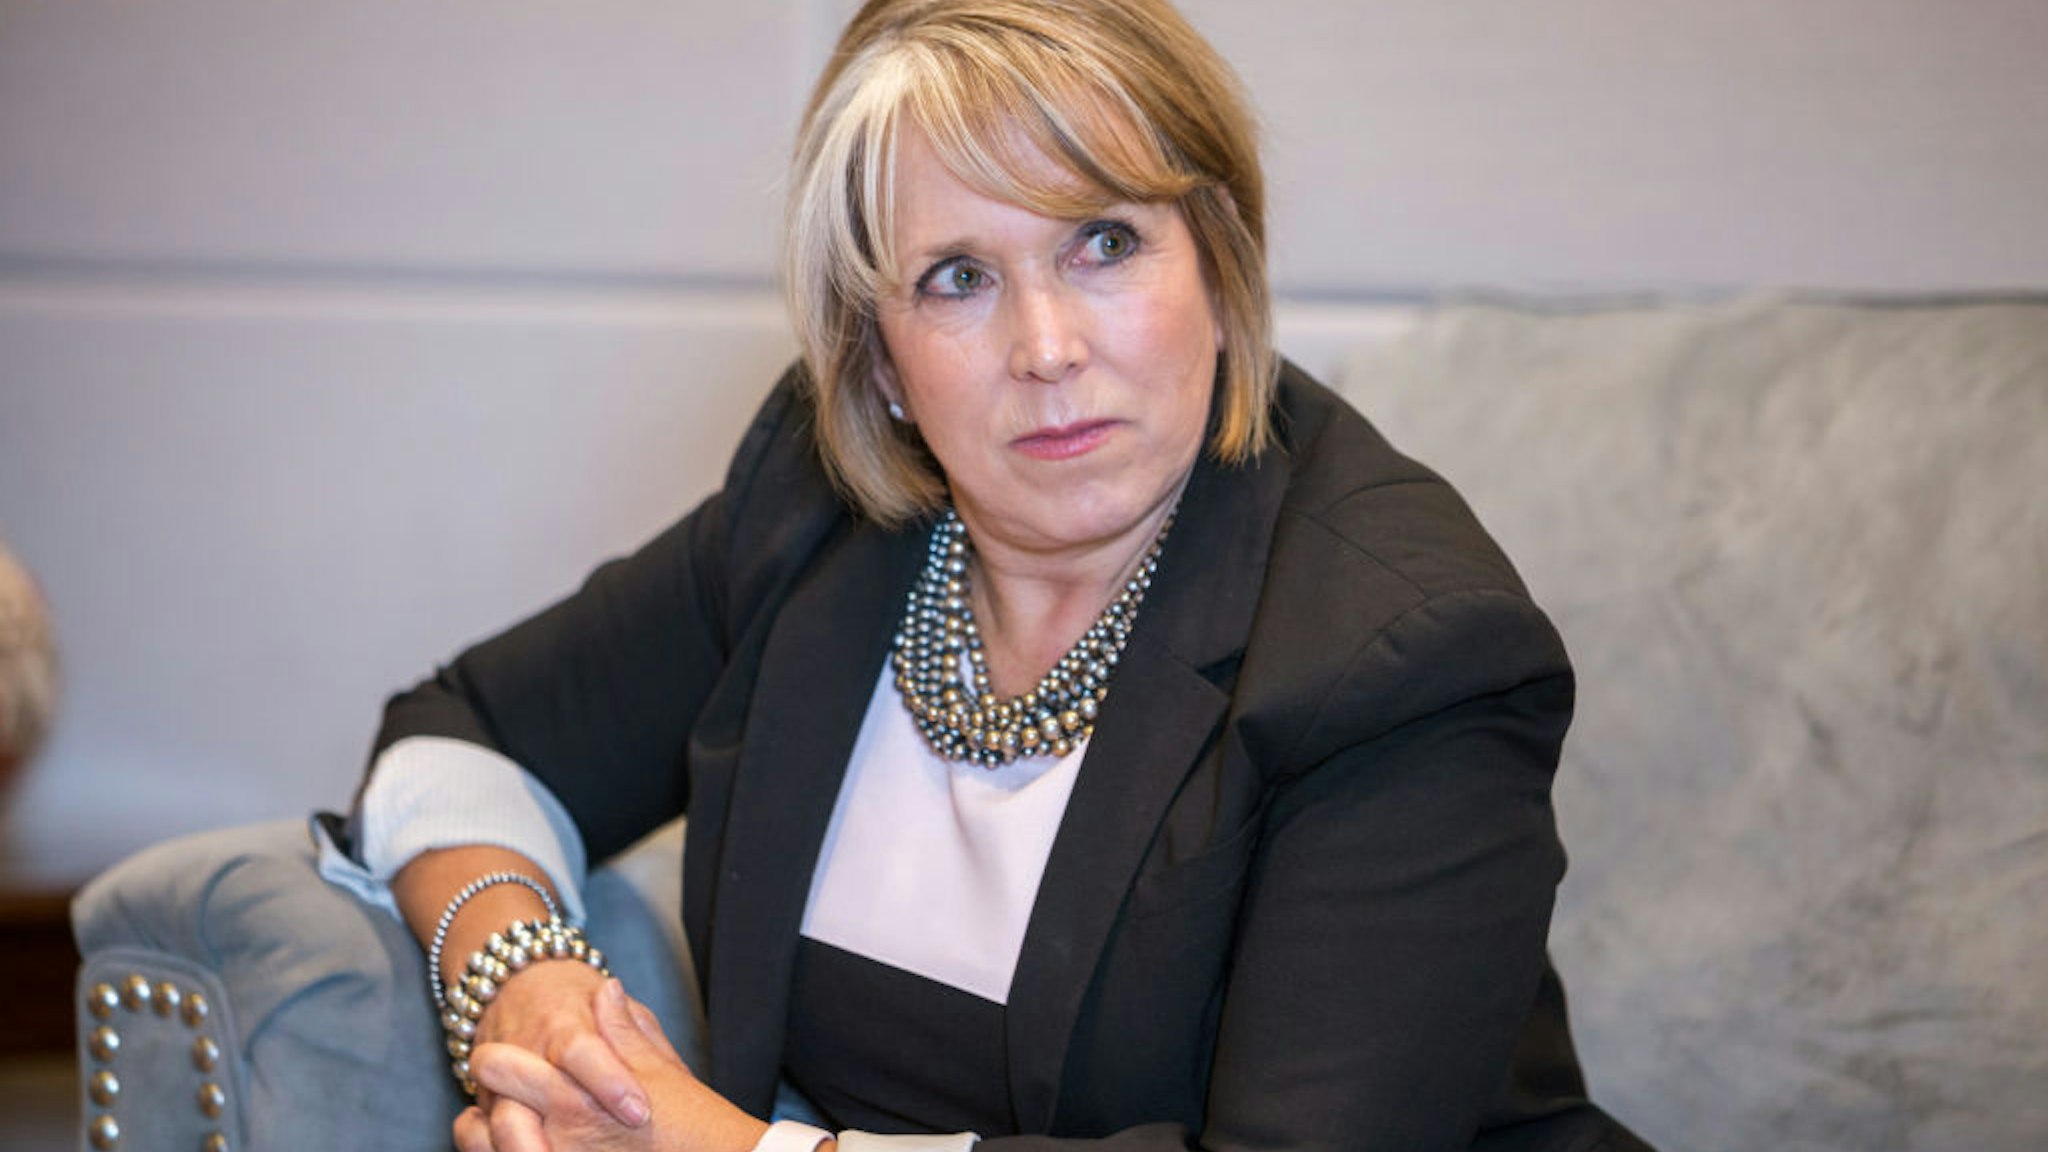 Michelle Lujan Grisham, governor of New Mexico, listens during an interview at her office in Santa Fe, New Mexico, U.S., on Thursday, Aug. 8, 2019. Lujan Grisham is balancing her concern over the catastrophic effects of climate change with the state's extraordinary dependence on oil and gas. Photographer: Steven St John/Bloomberg via Getty Images